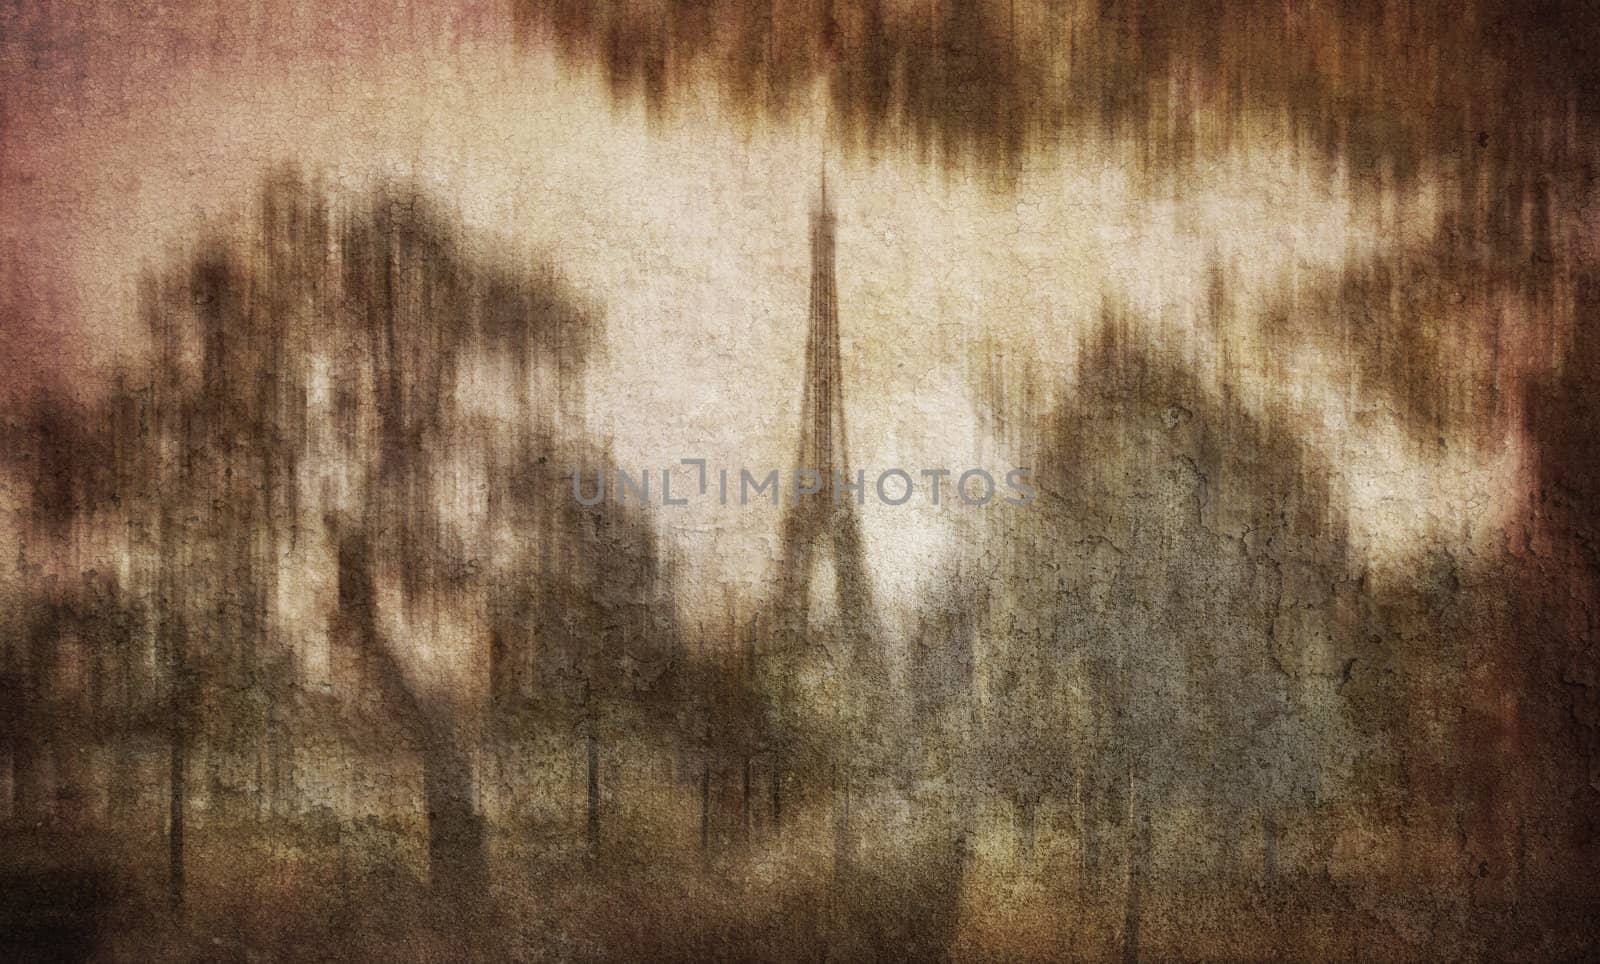 Like an old Japanese print. Several of my photos worked together to make a dreamlike retro look. Dream of the Eiffel tower.